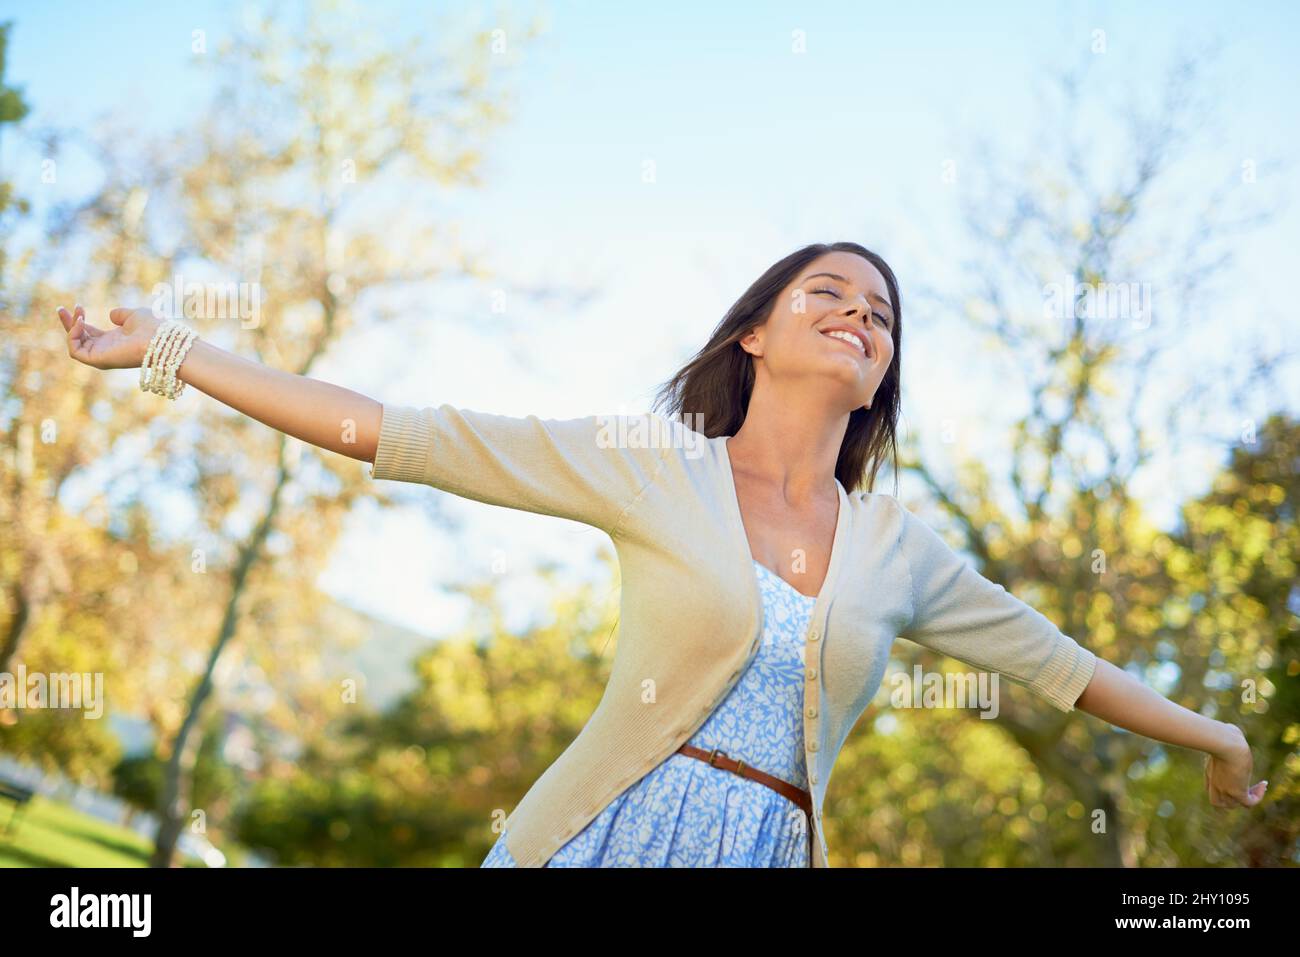 Nature loving. Shot of a carefree young woman enjoying a day at the park. Stock Photo